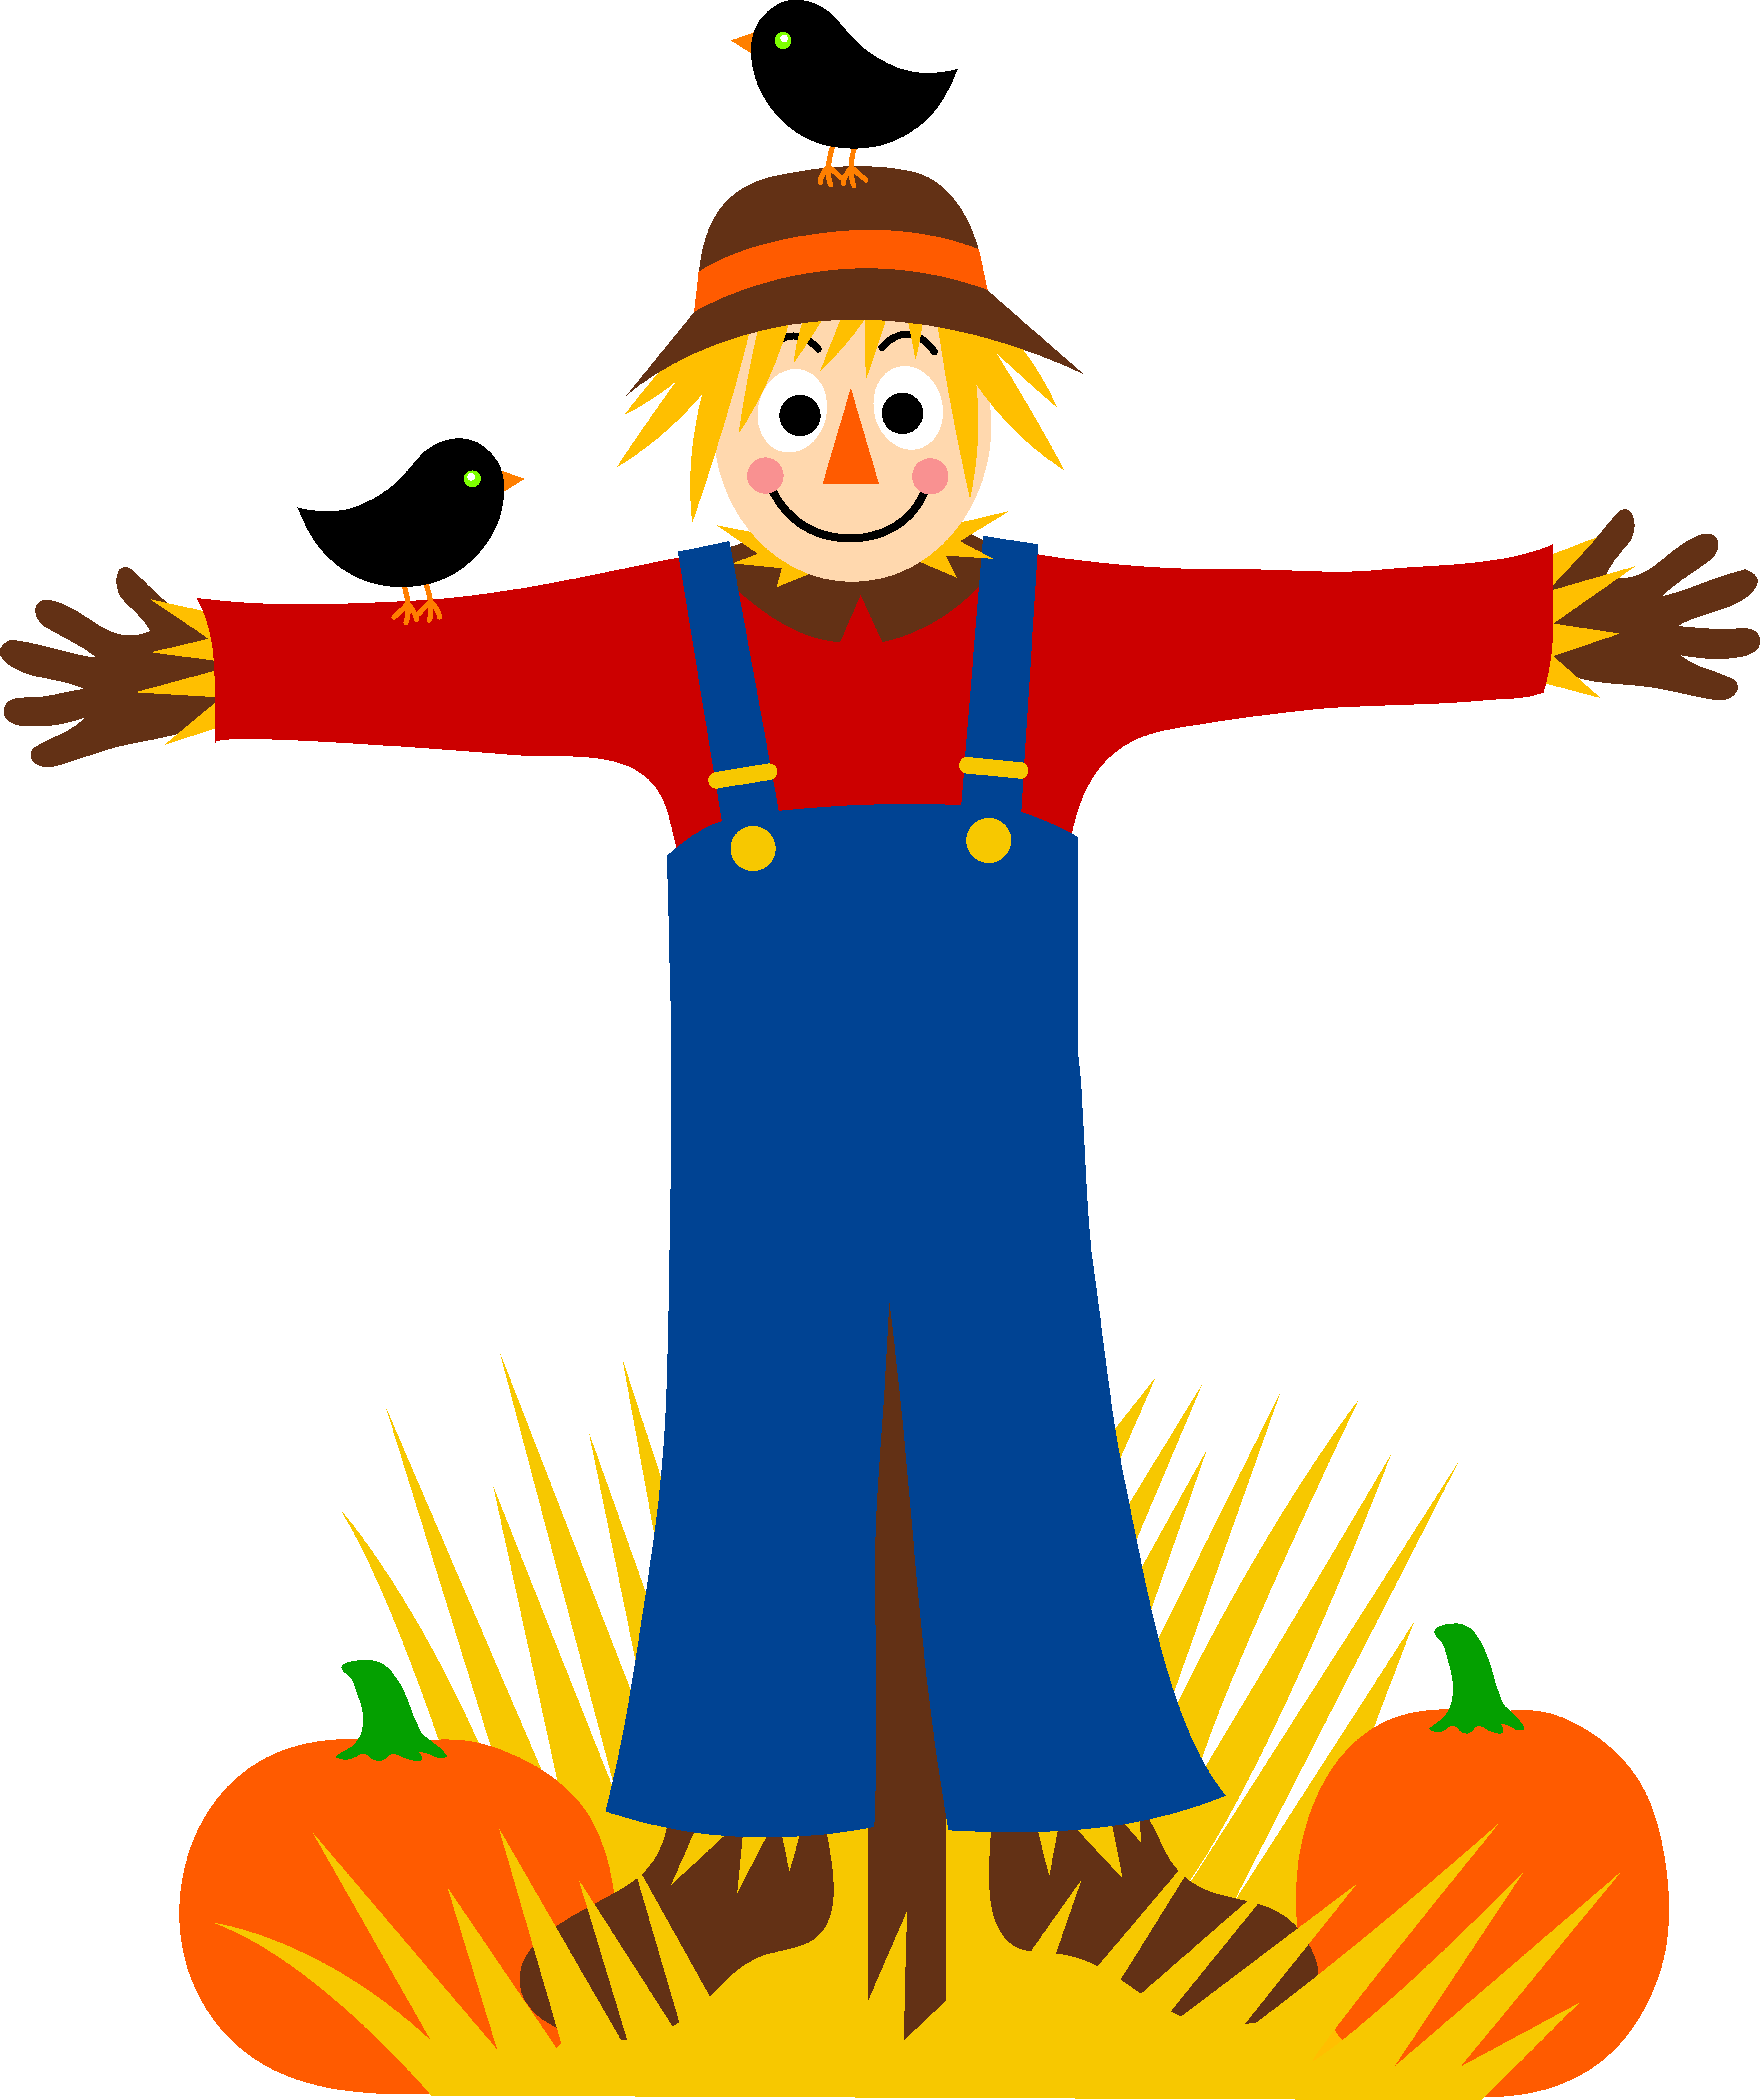 Scarecrow clip art pictures free clipart images.